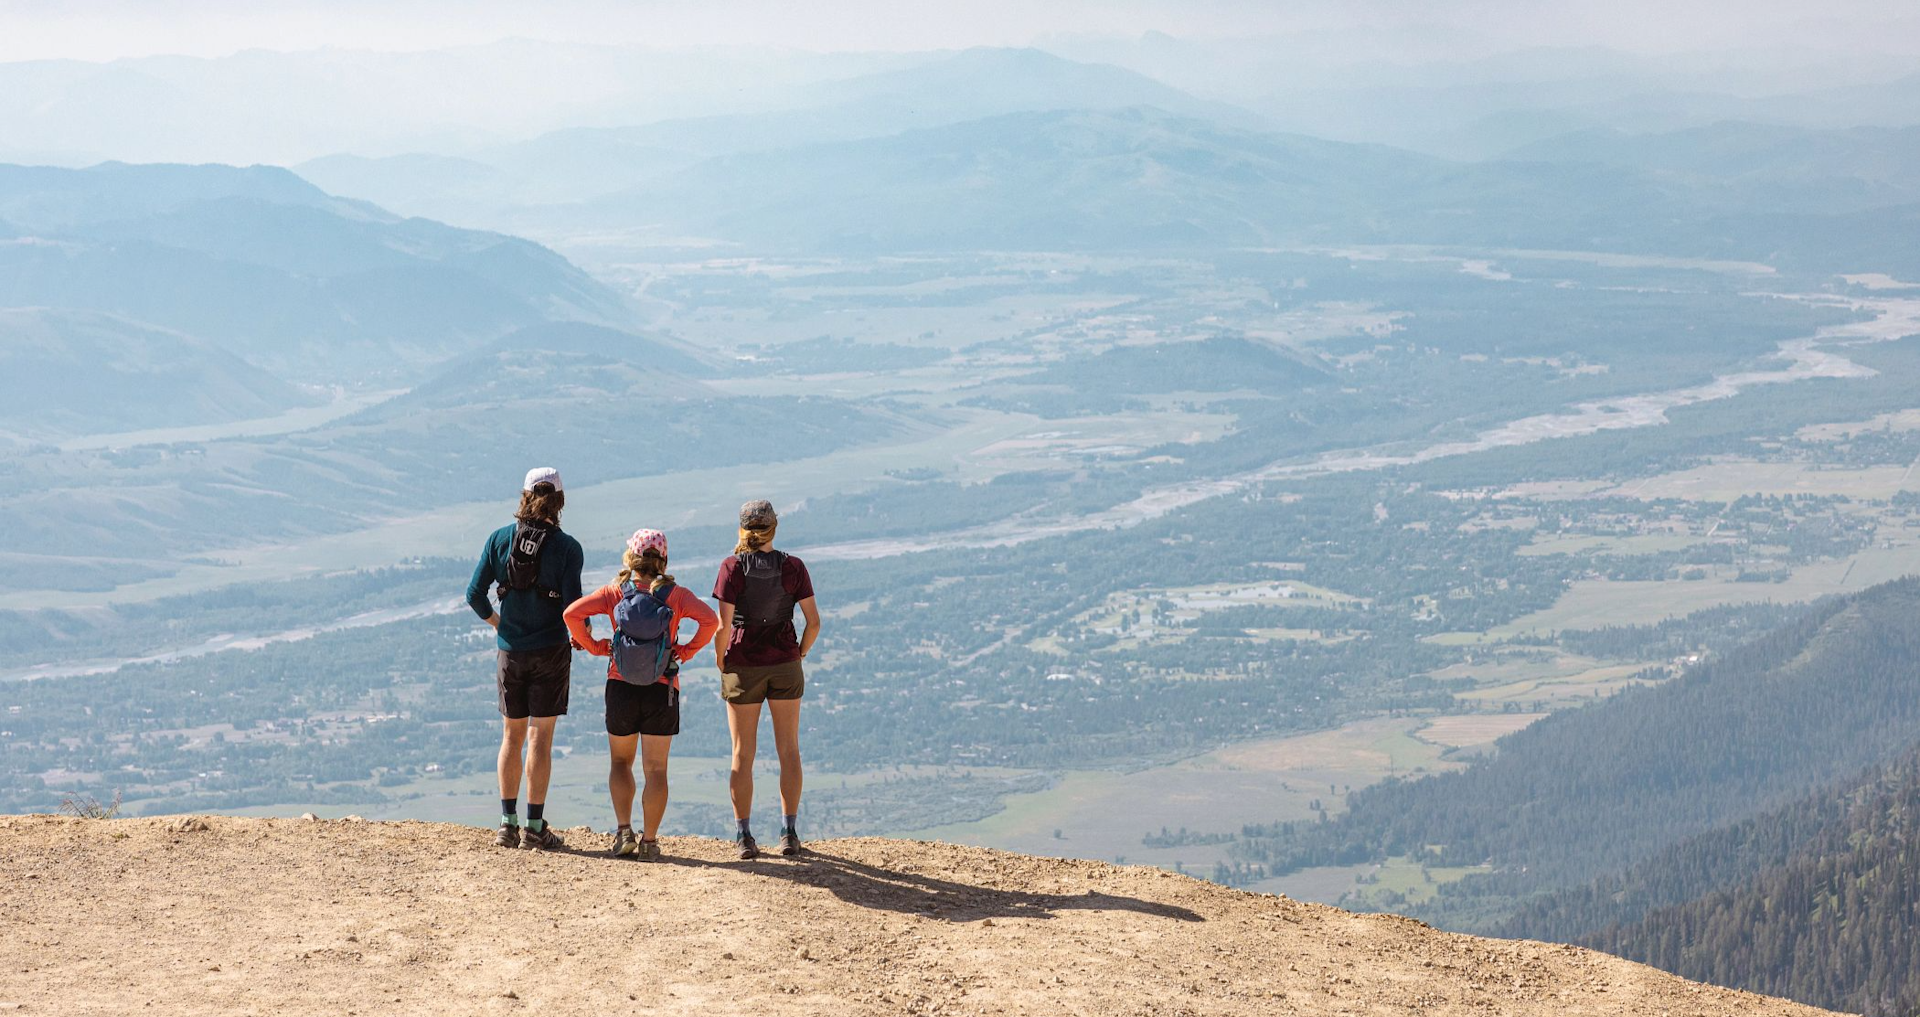 Three hikers looking out at the beautiful view